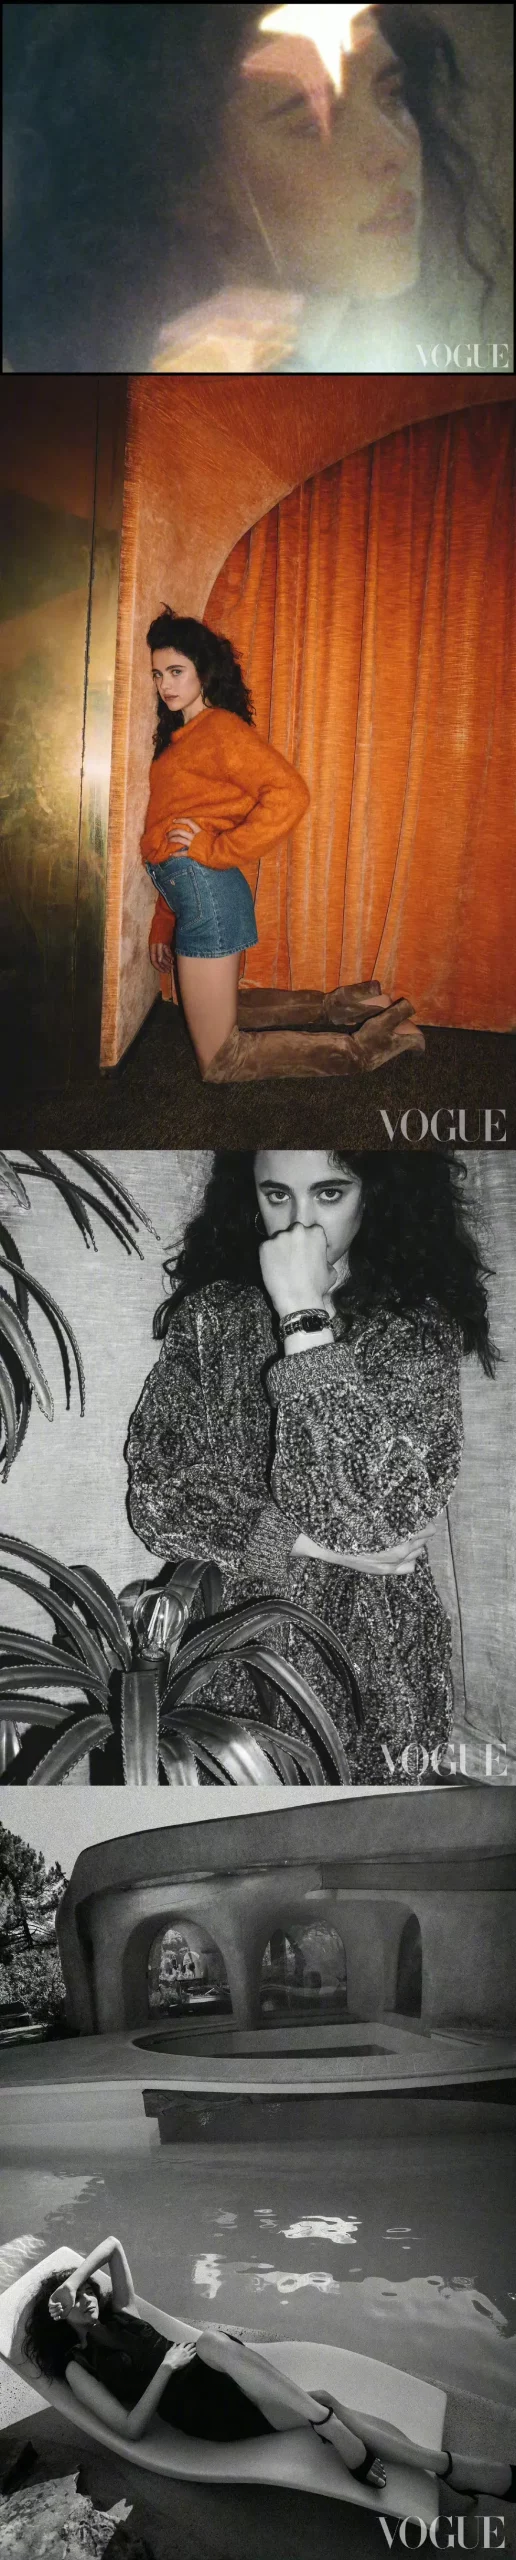 Margaret Qualley, new photo shoot for "PhotoVOGUE" | FMV6